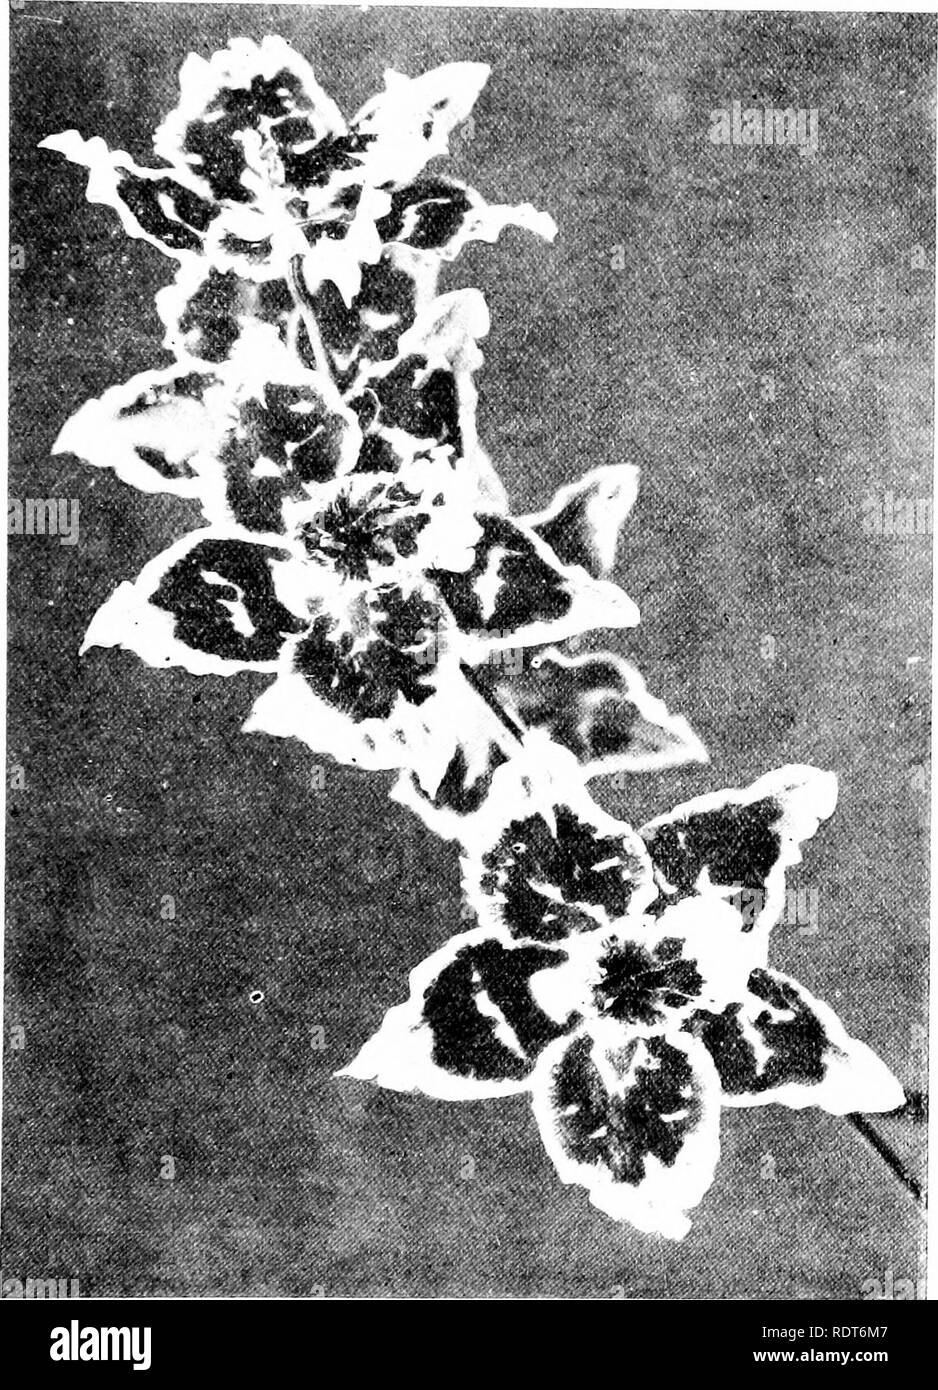 . The orchid stud-book: an enumeration of hybrid orchids of artificial origin, with their parents, raisers, date of first flowering, references to descriptions and figures, and synonymy. With an historical introduction and 120 figures and a chapter on hybridising and raising orchids from seed. Orchids. Part II.l THE ORCHID STUD-HOOK. 123 21 MILTONIA. , 1. M. x Bleuana (Roezlii x vexillaria 5), &gt;'. S. II. Fr. 1889, 29, 30; Orchidoph, 1889, 45 ; G.C. 1S89, i. 203 : Liud. iv. t. 176 ; Rdchenb. ser. 2, i. 67, t. 32 ; O./l. ix. t. 412 (v. splendens) ; T Jl/nw, 0. viii, 118, 119, f. ; O.A'. 1893 Stock Photo